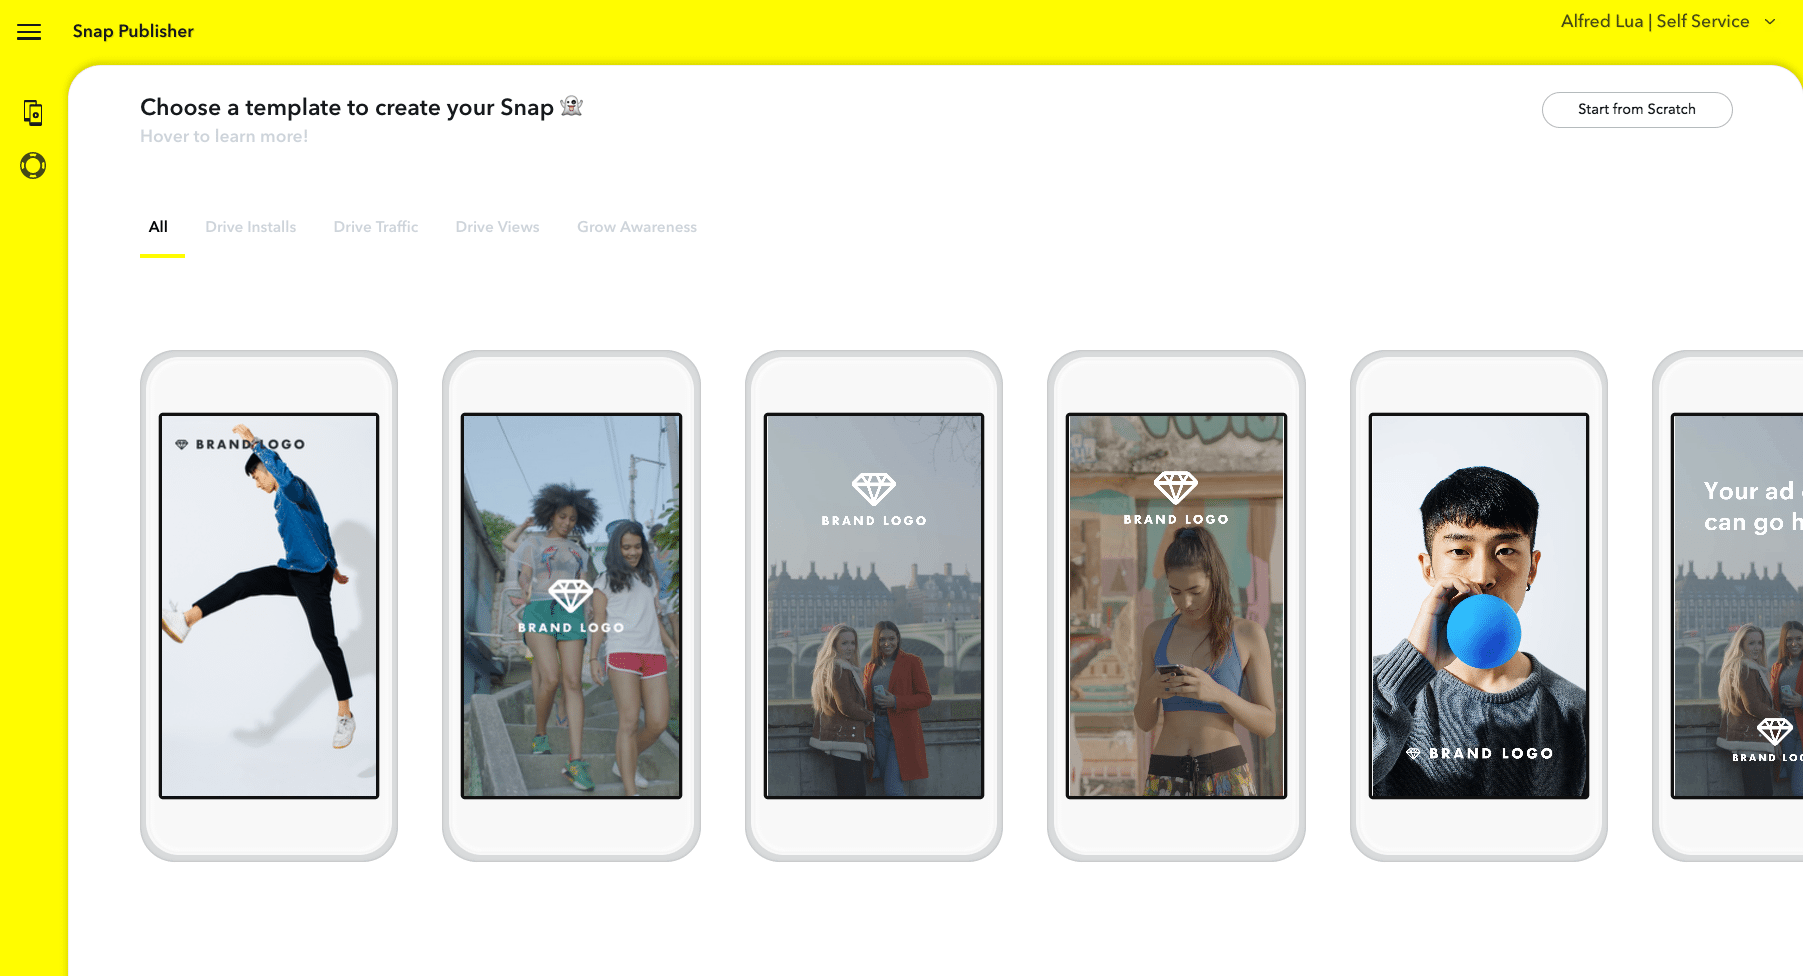 Snap Publisher